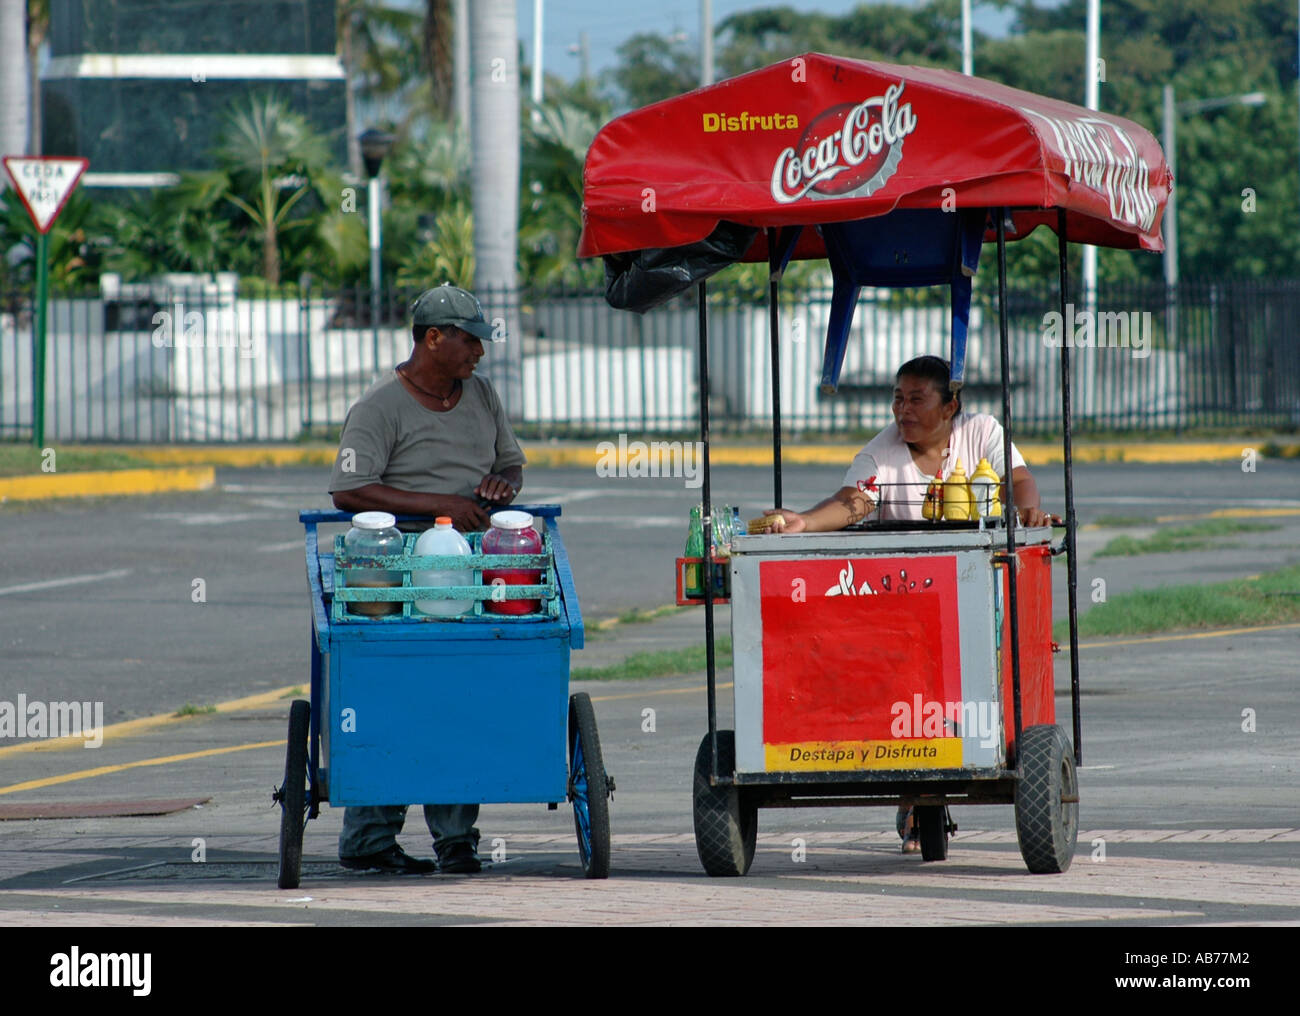 Street vendors in central area of Managua, capital of Nicaragua, Central America Stock Photo